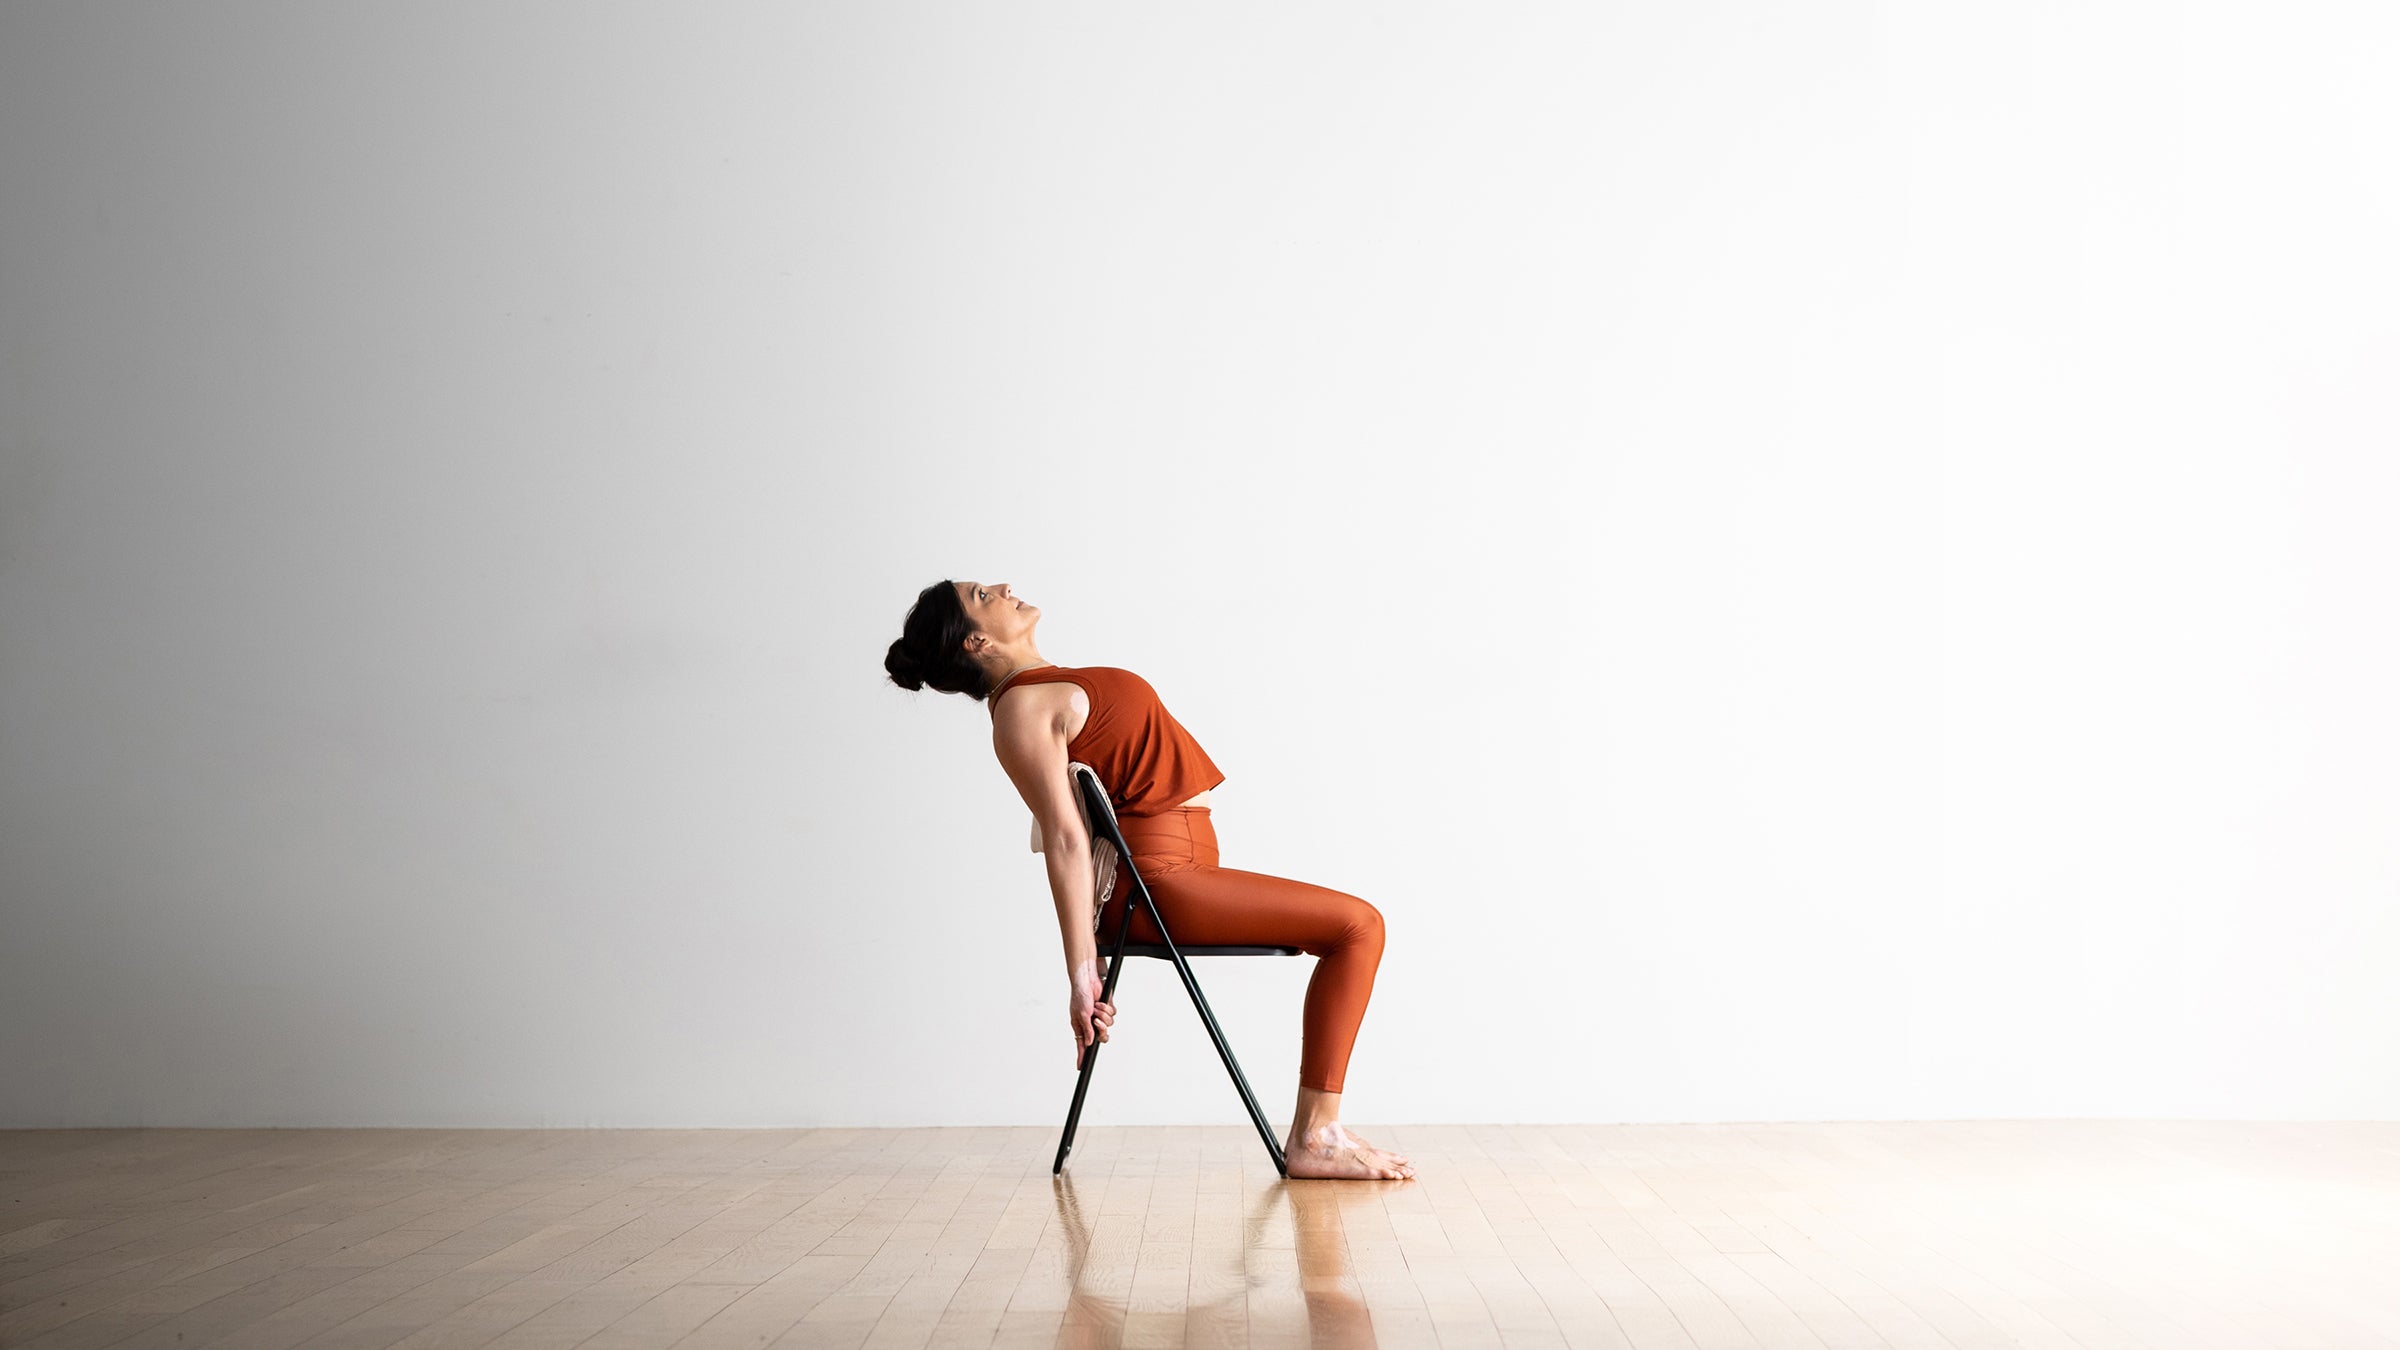 The Chair Pose - Using a chair in your model posing can enrich your  portfolio. | Photo Sessions, … | Model poses, Photography poses women,  Fashion photography poses